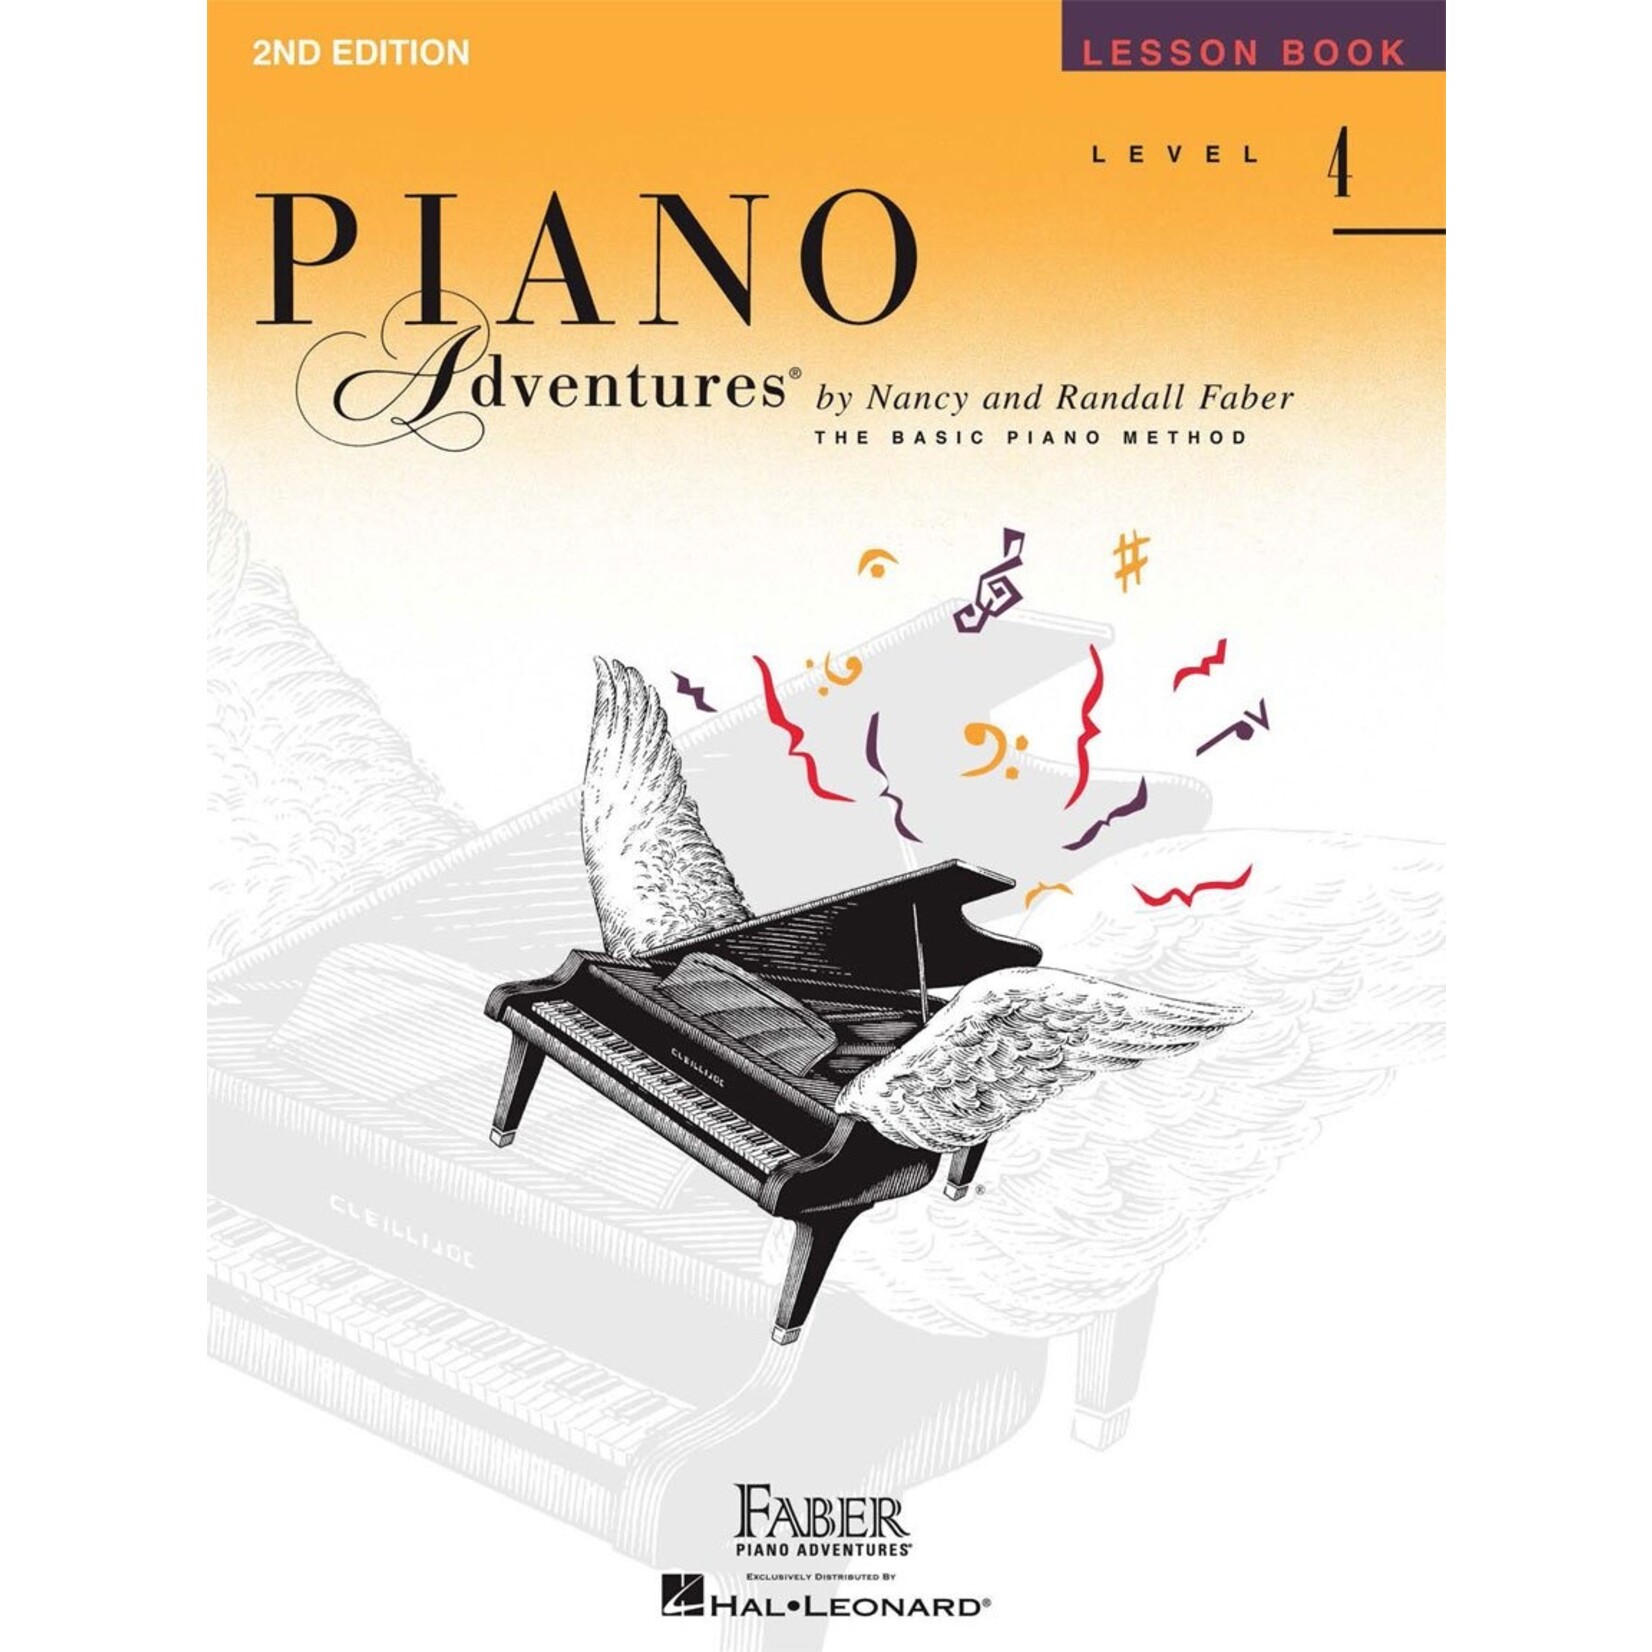 Faber Piano Adventures Lesson Book Level 4 2nd Edition